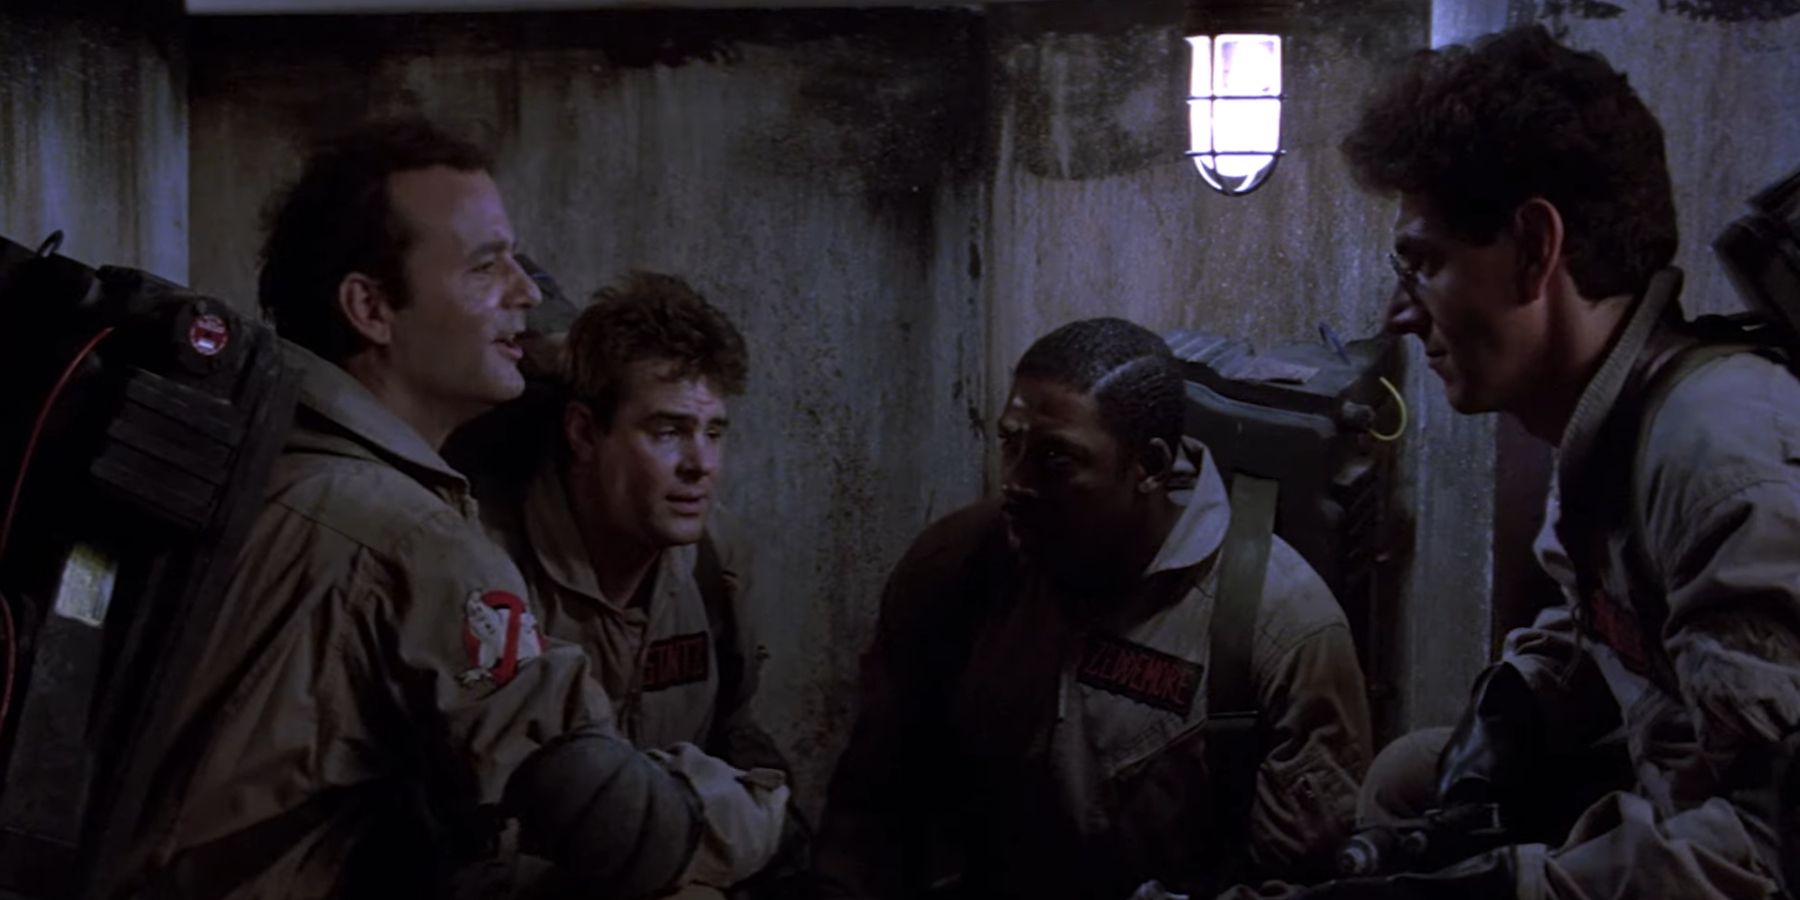 The Ghostbusters planning their relatiation against Gozer in Ghostbusters 1984